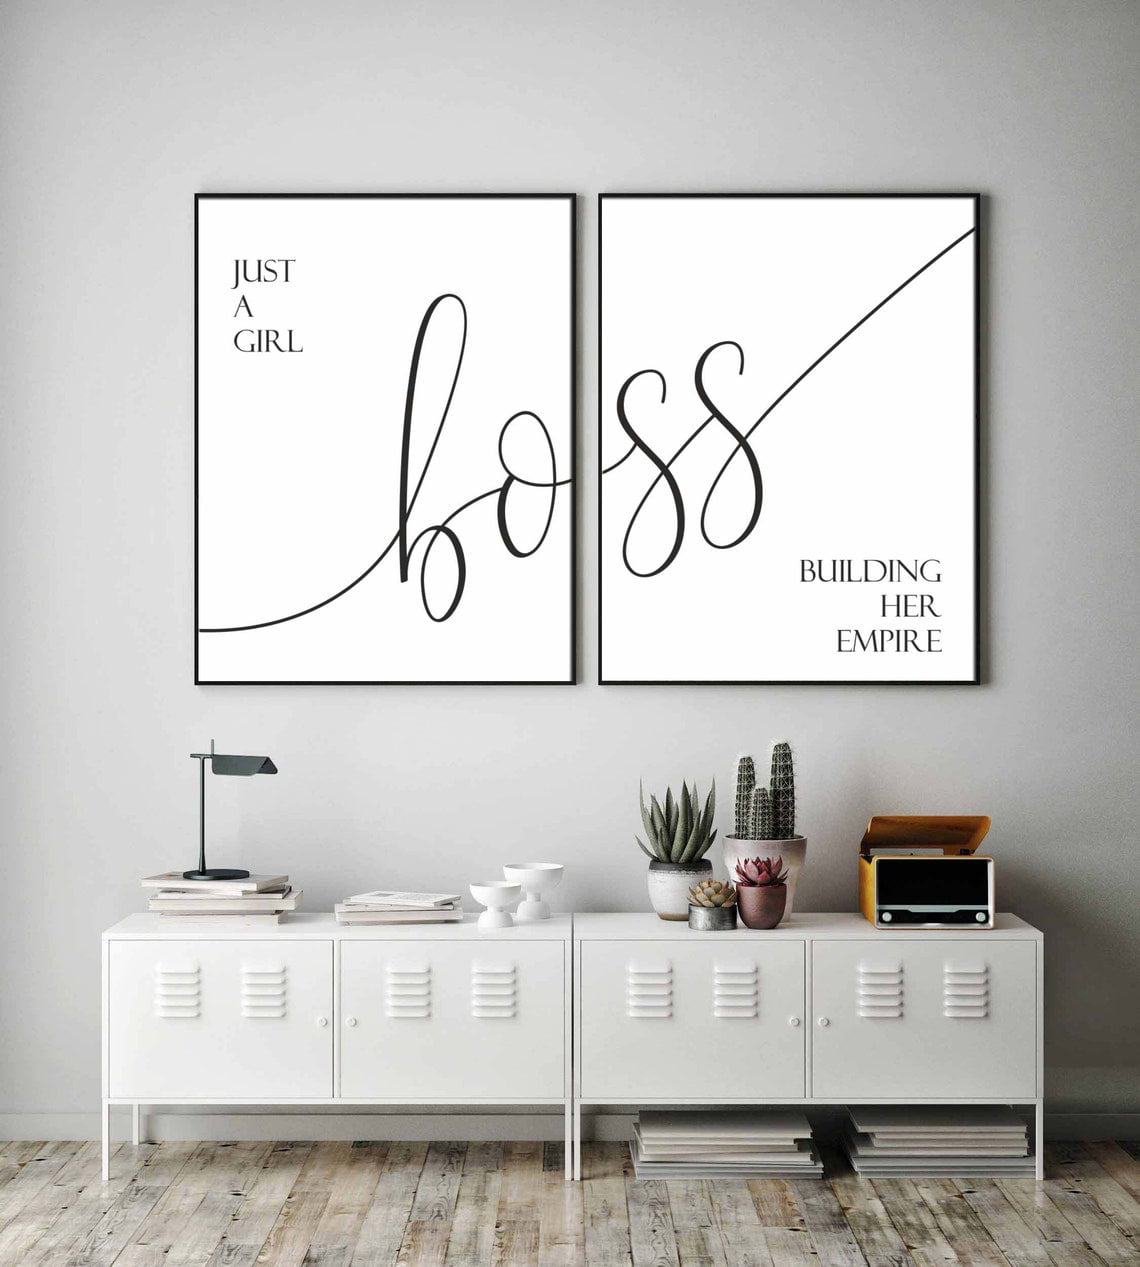 For Office Building Canvas Poster Empire Set Girl Unframed Office Wall for Gift Just Boss Art Painting New 2 A of Prints Decor Her Lady Boss